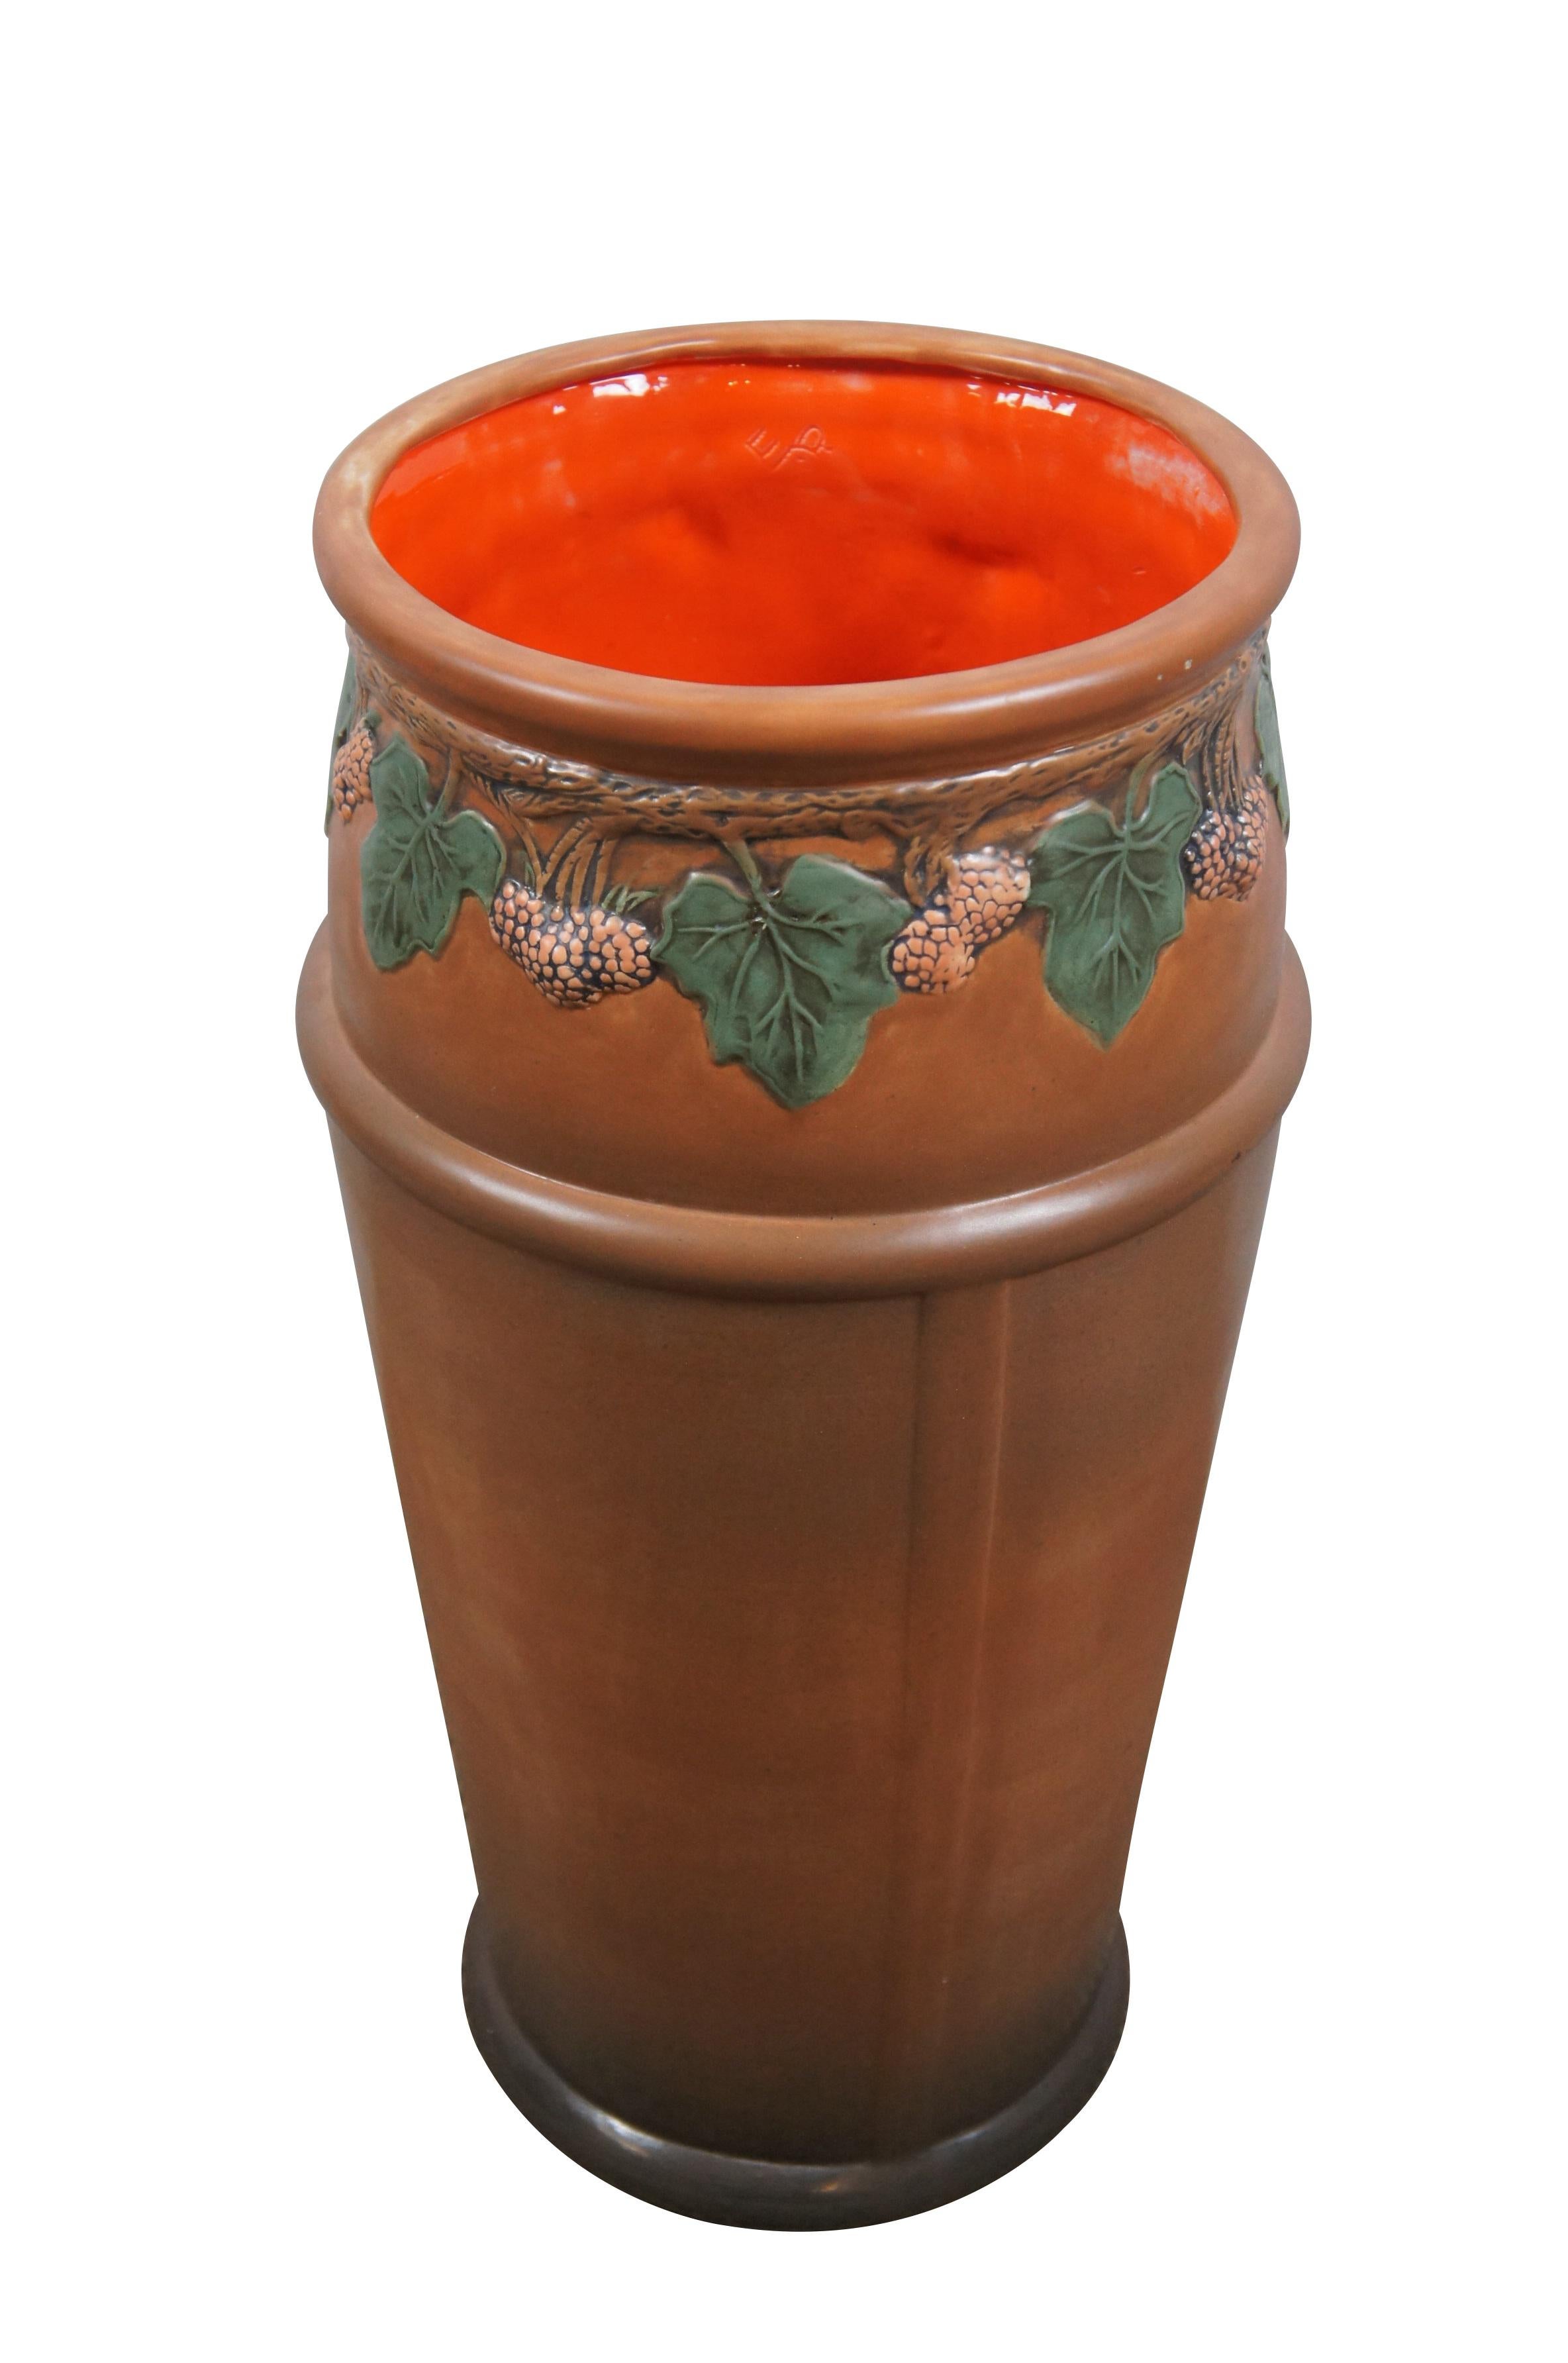 Mid 20th century ceramic umbrella / cane stand. Cylindrical body with molded straps and raspberry vine around the upper edge; brown ombre coloring with orange interior. Marked E.P and 